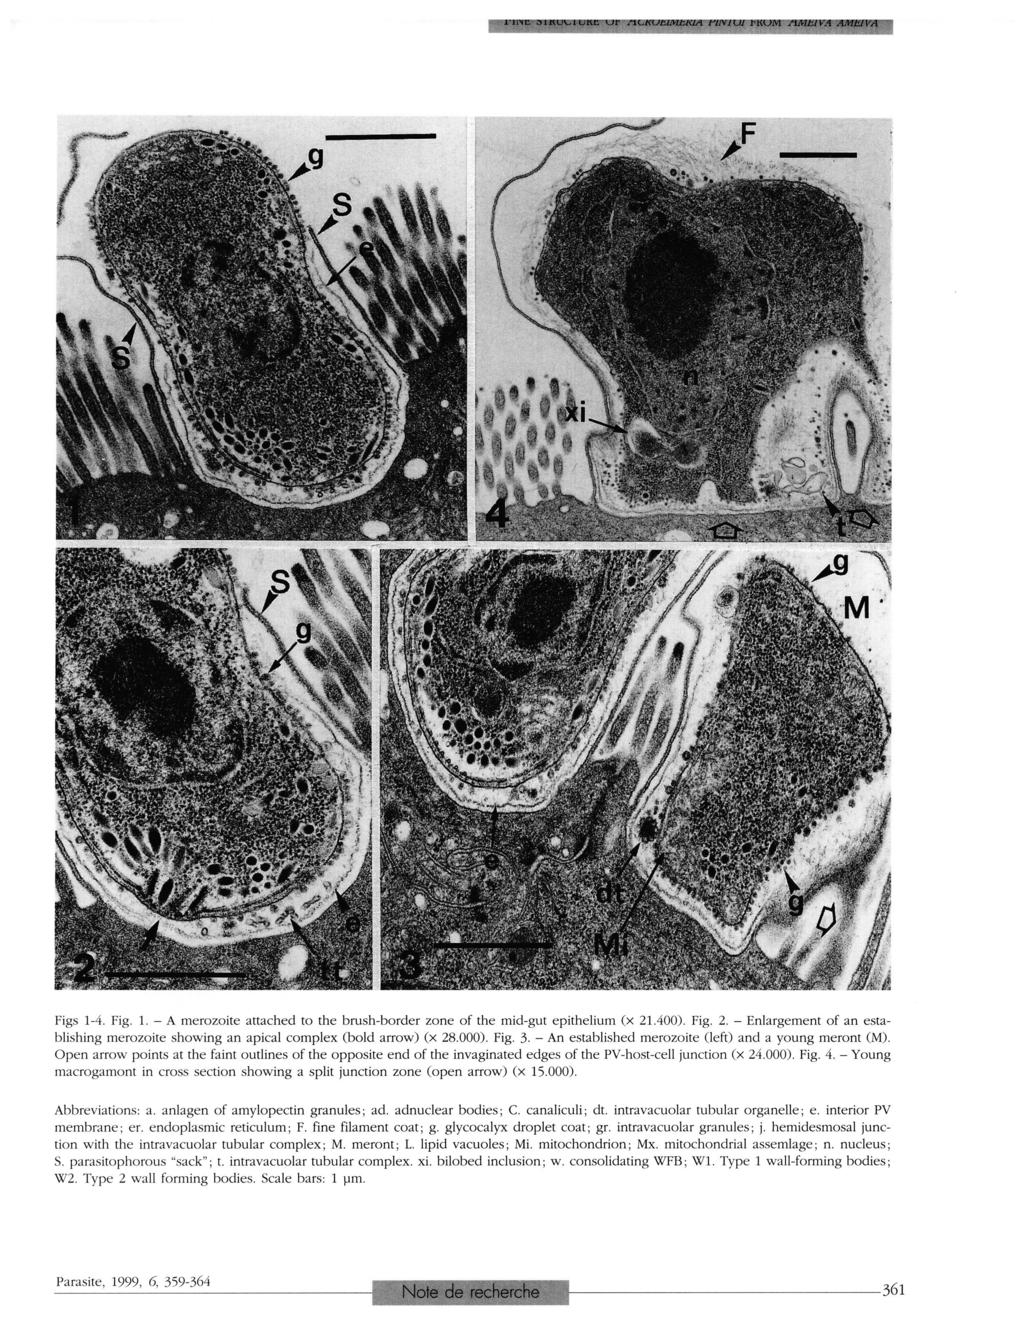 Figs 1-4. Fig. 1. - A merozoite attached to the brush-border zone of the mid-gut epithelium (x 21.400). Fig. 2. - Enlargement of an esta blishing merozoite showing an apical complex (bold arrow) (x 28.